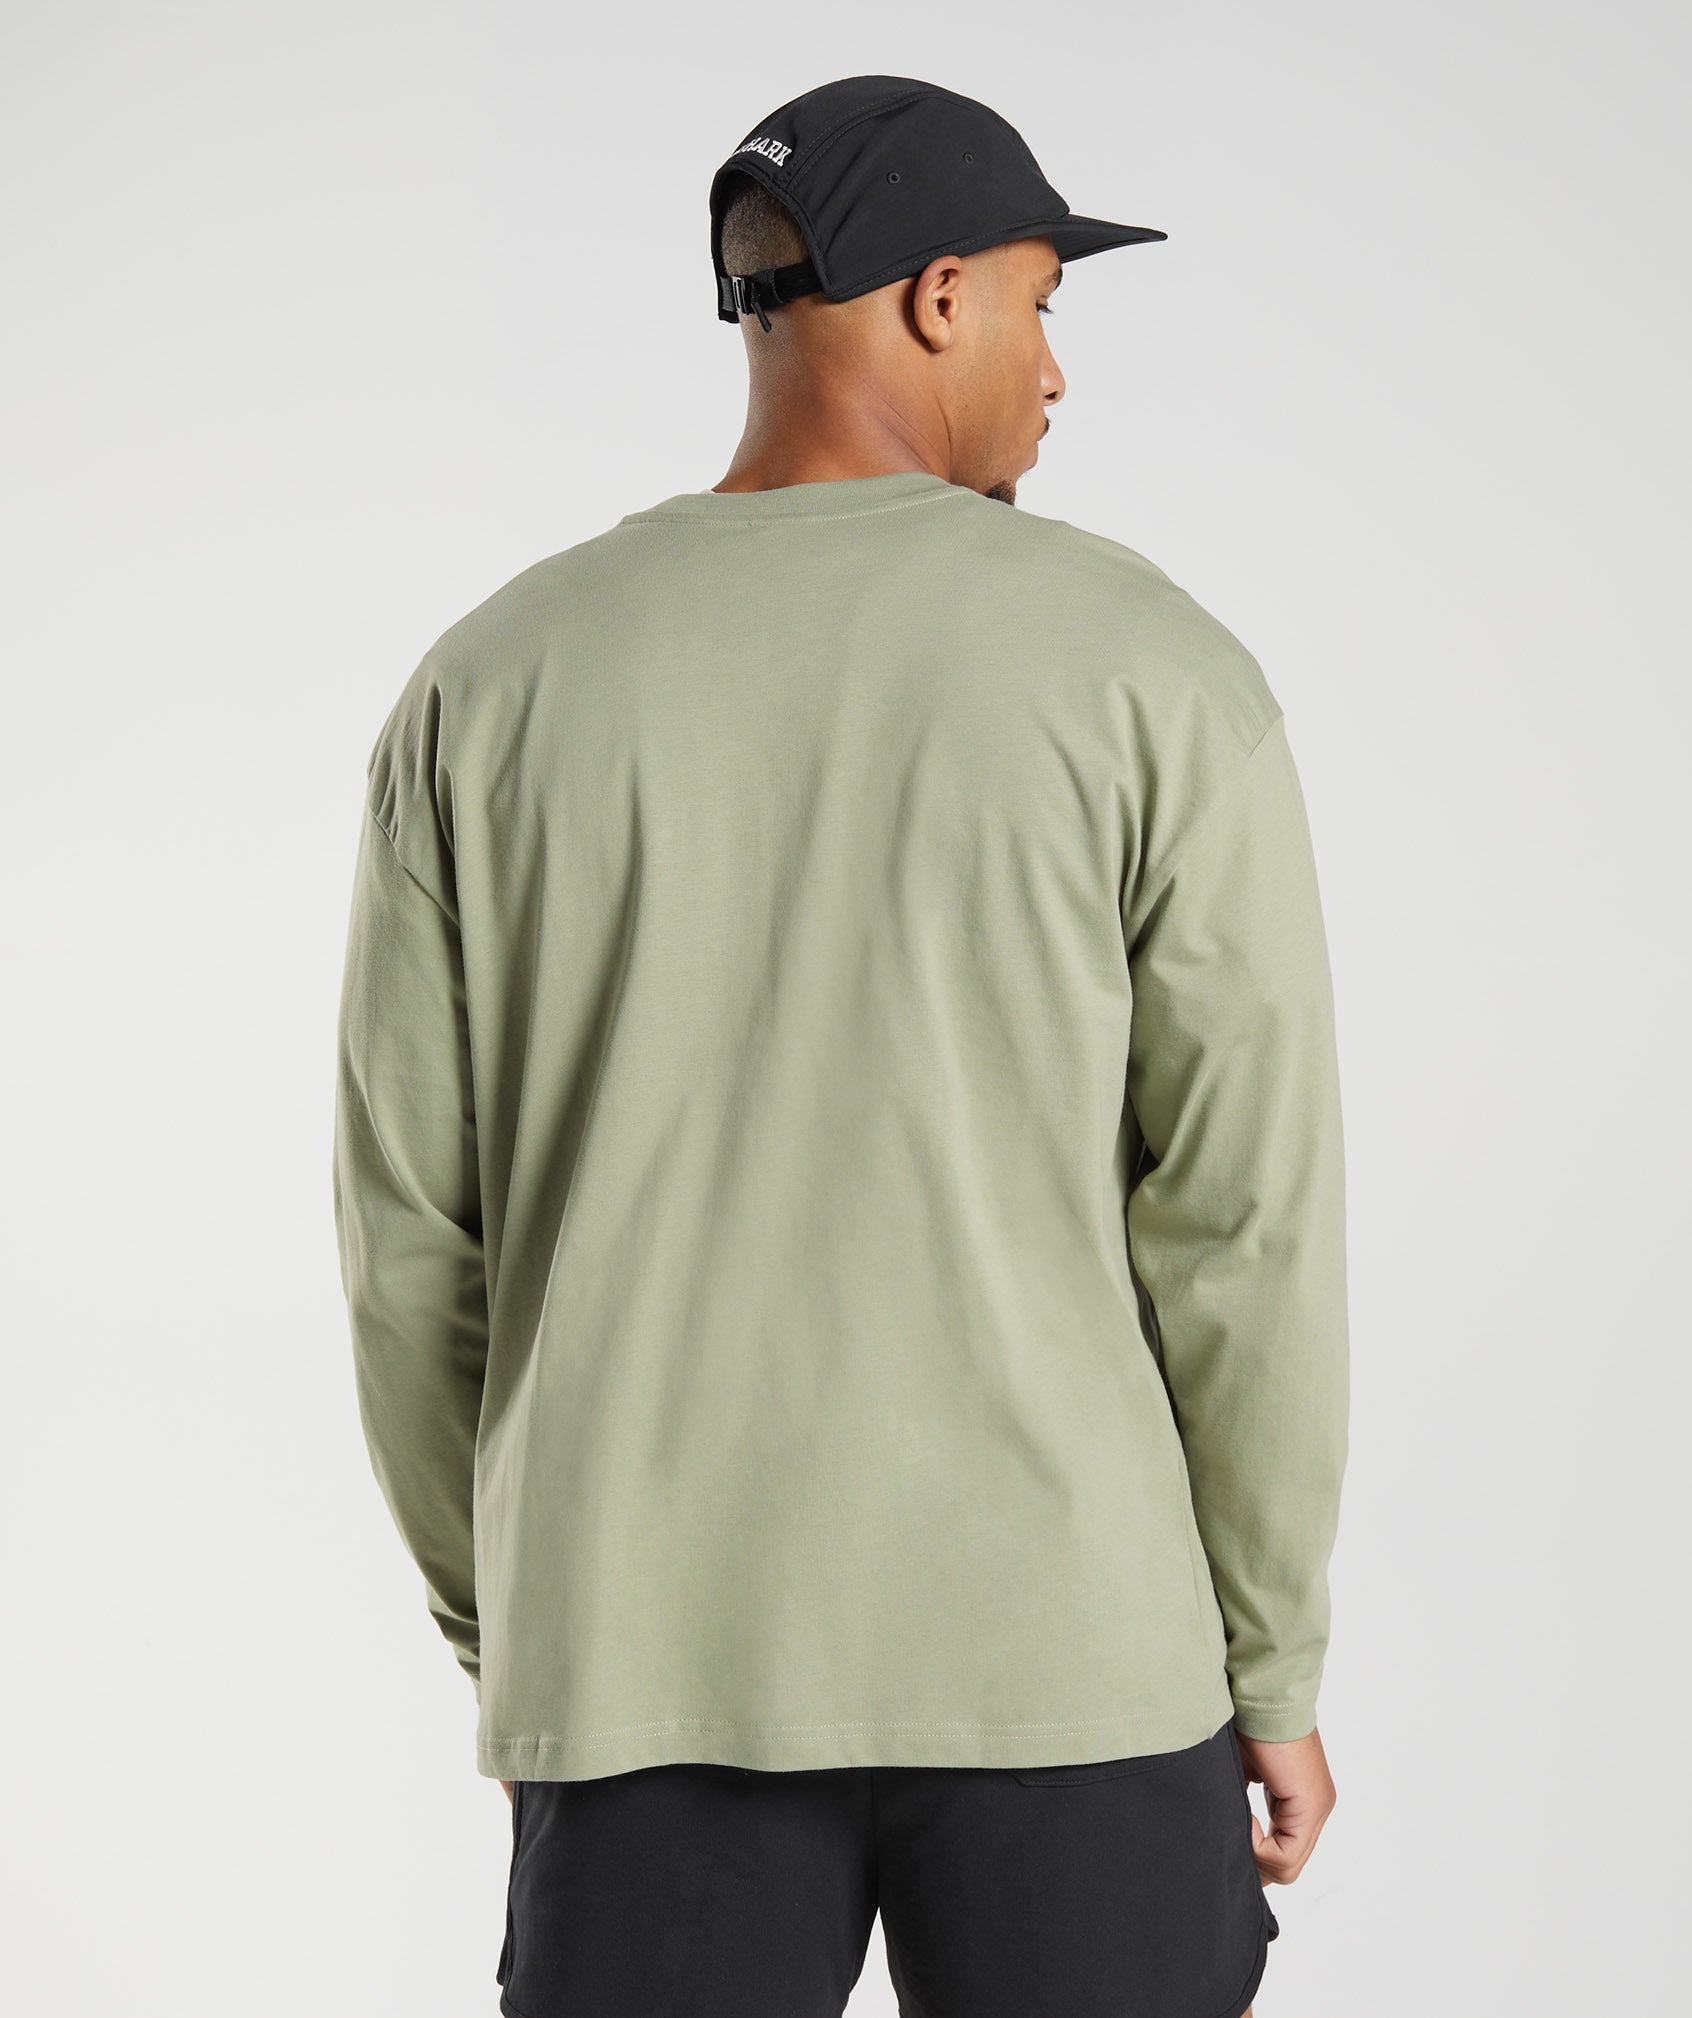 Rest Day Sweats Long Sleeve T-Shirt in Sage Green - view 3